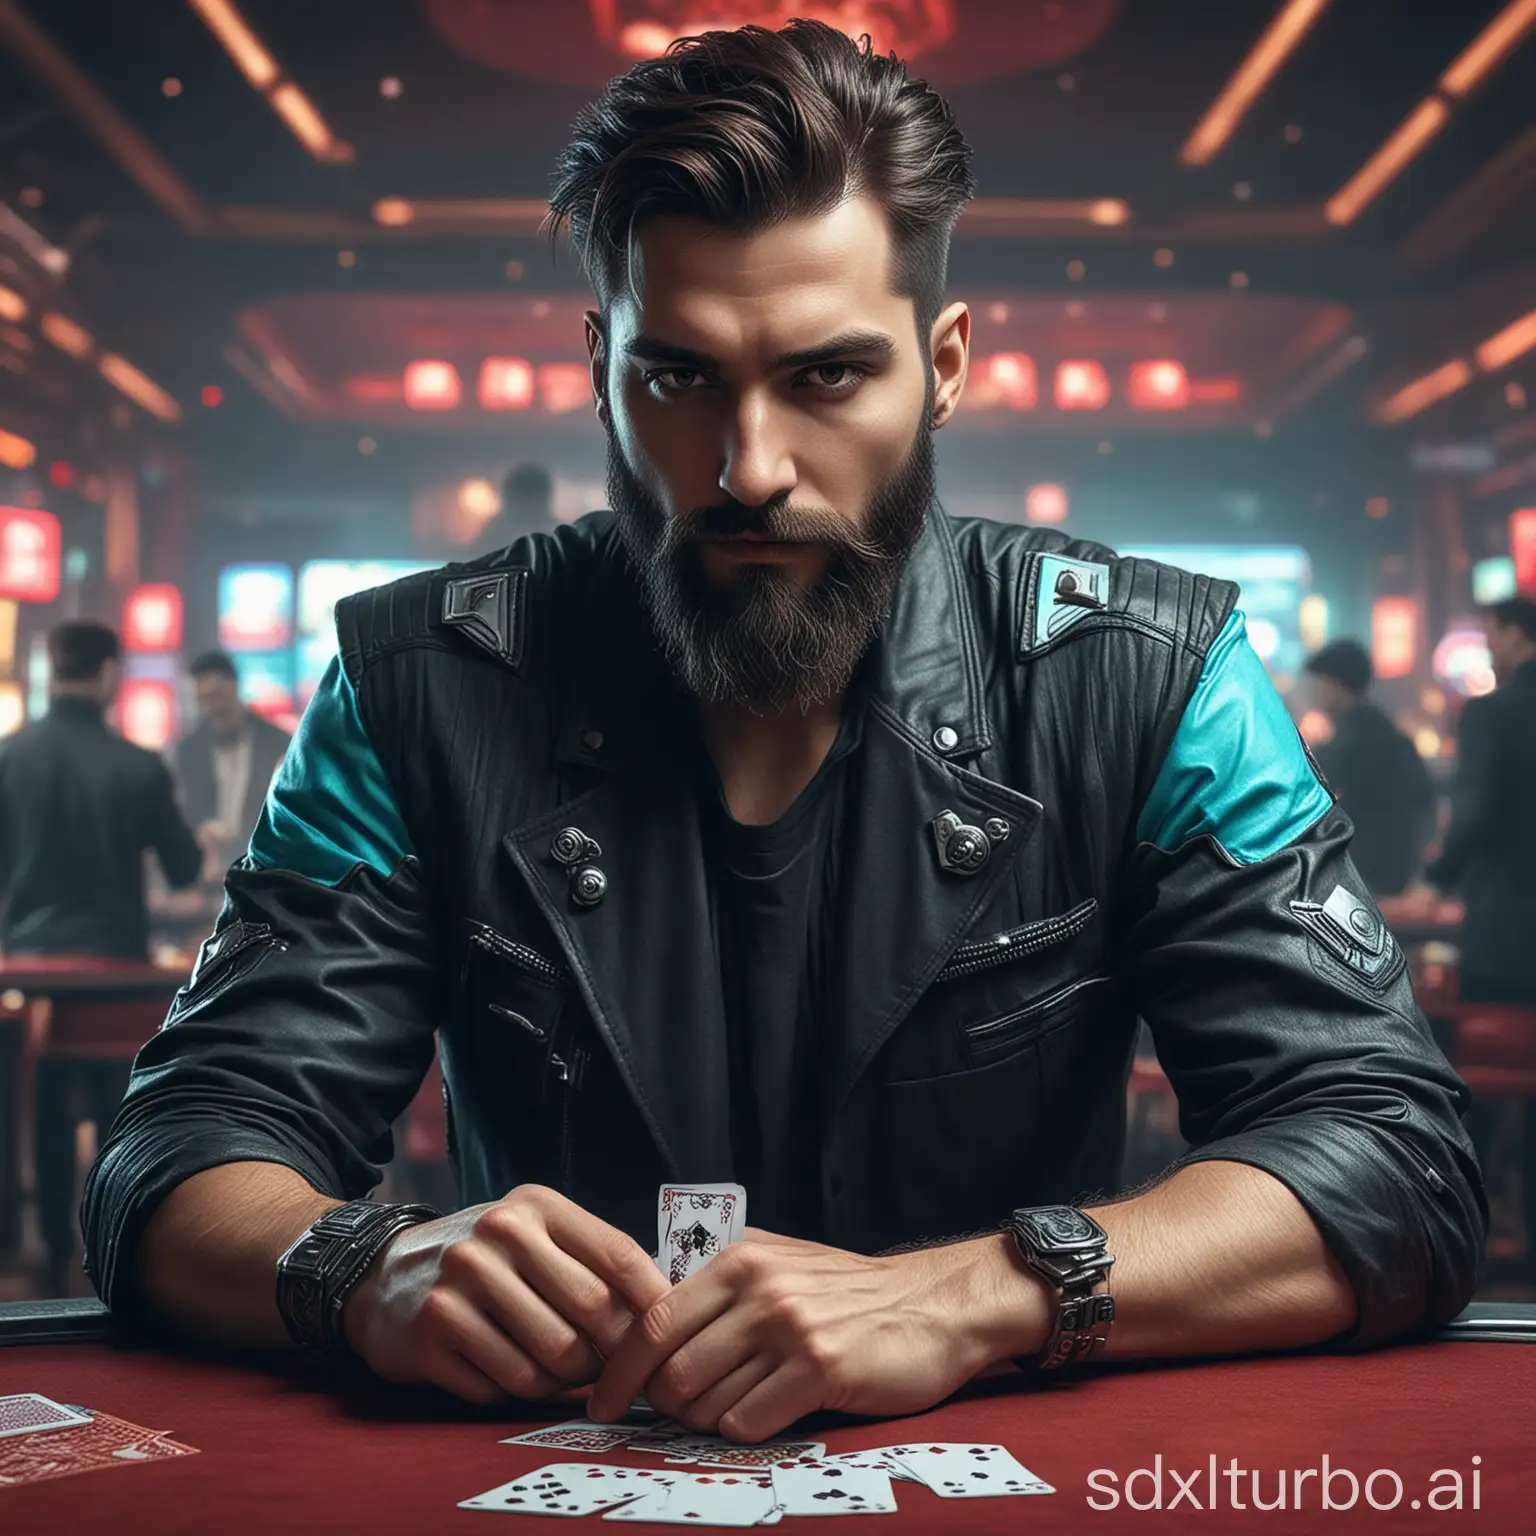  a man holding a deck of cards in front of a casino table, digital art, by Adam Marczyński, shutterstock, digital art, portrait of a cyberpunk man, very attractive man with beard, red and cyan theme, game promotional poster, cinematic outfit photo, portrait of ernest khalimov, 2 0 2 2 photo, fantasy art behance